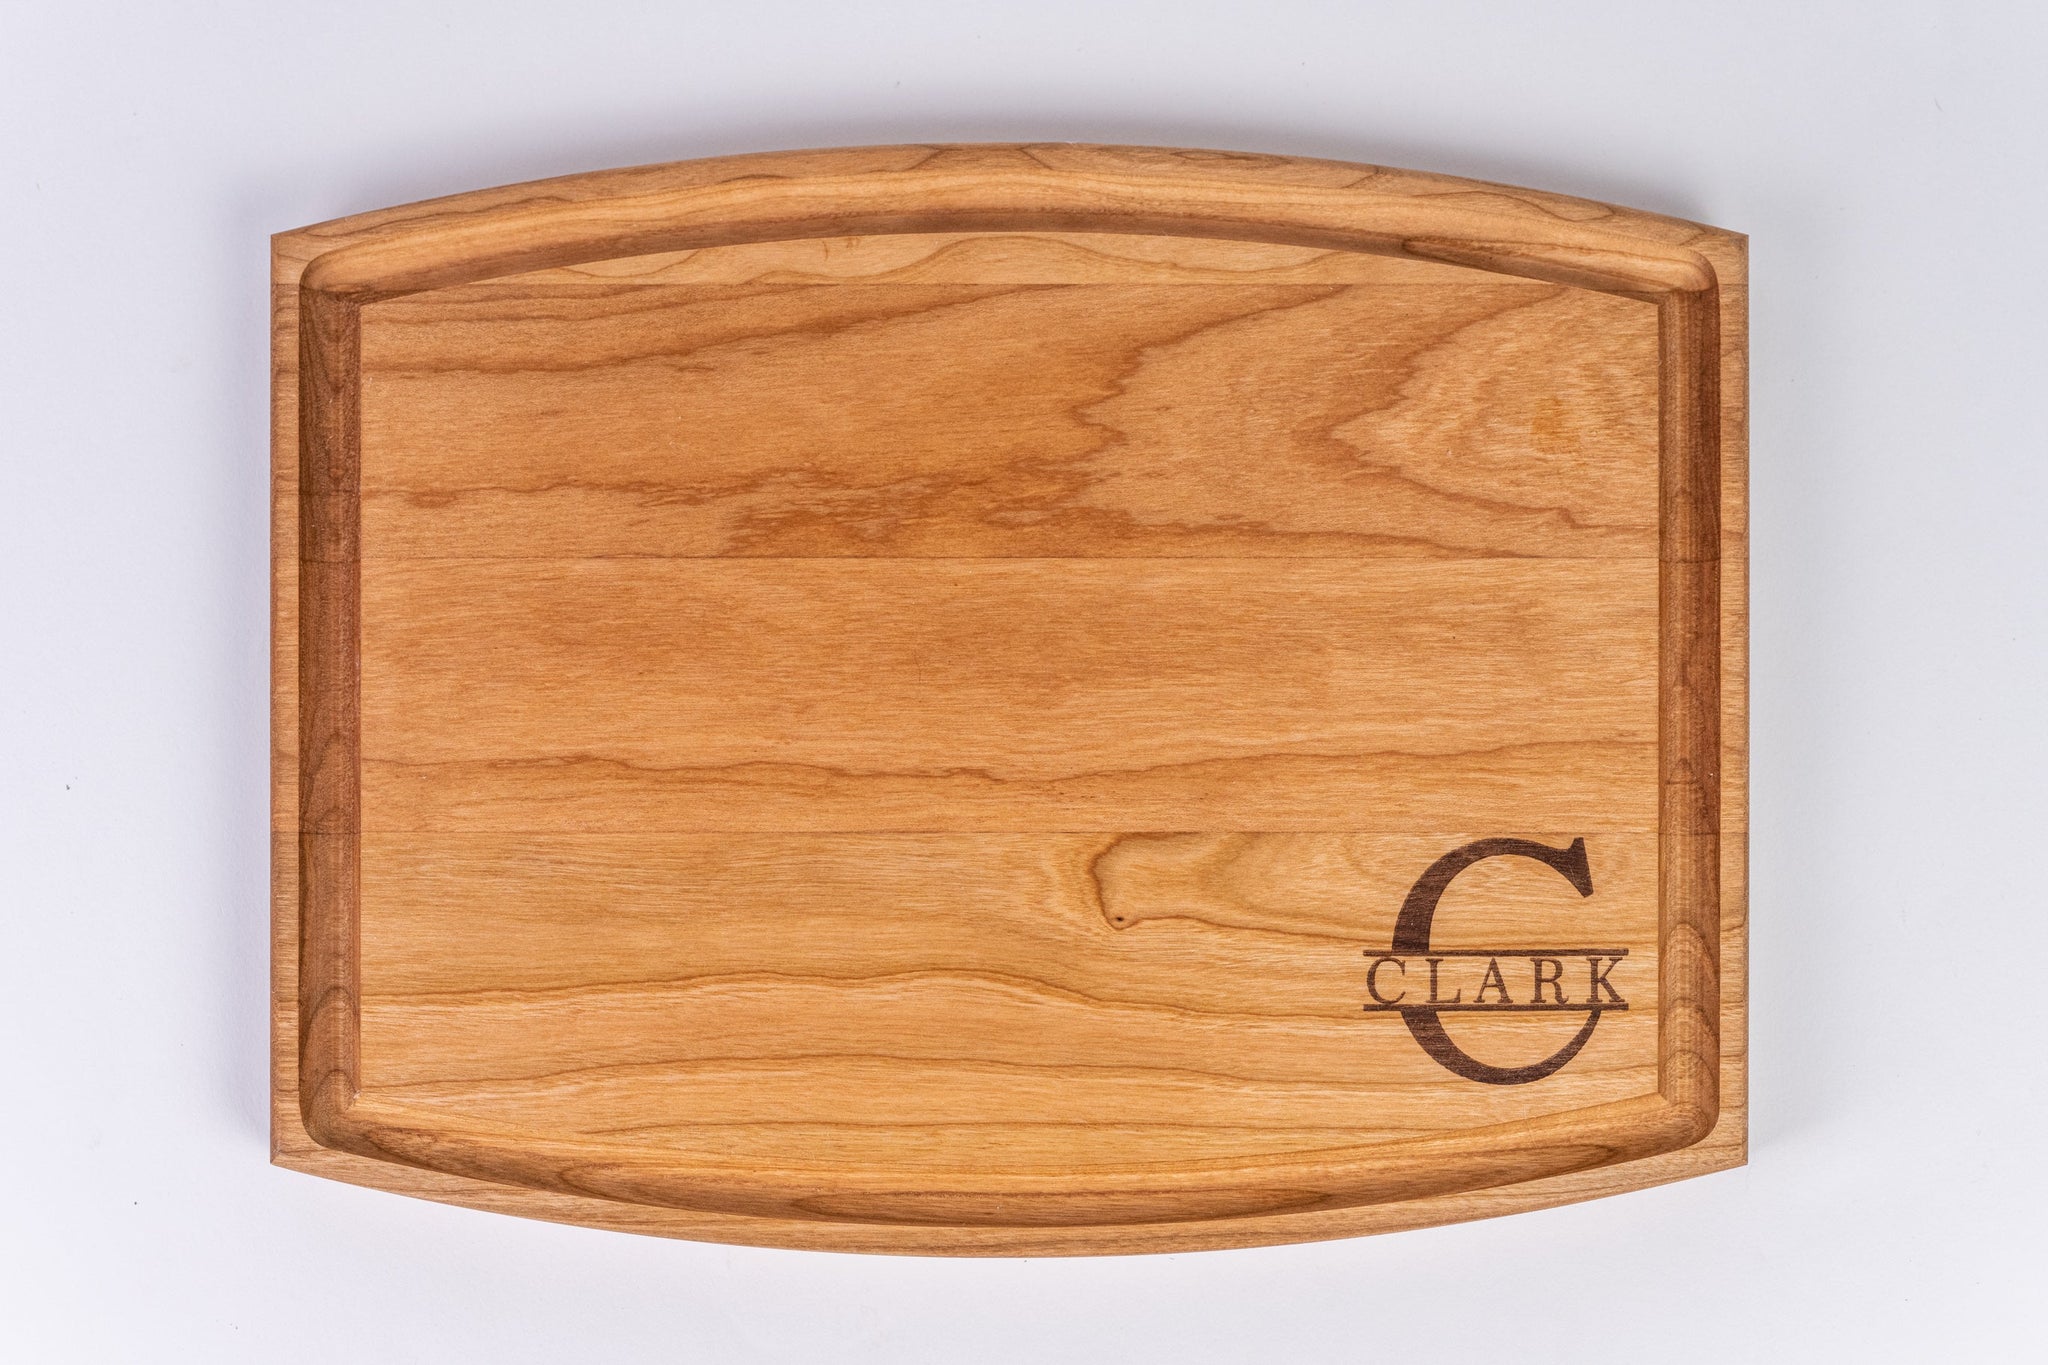 Professional Cutting Board with Juice Groove 